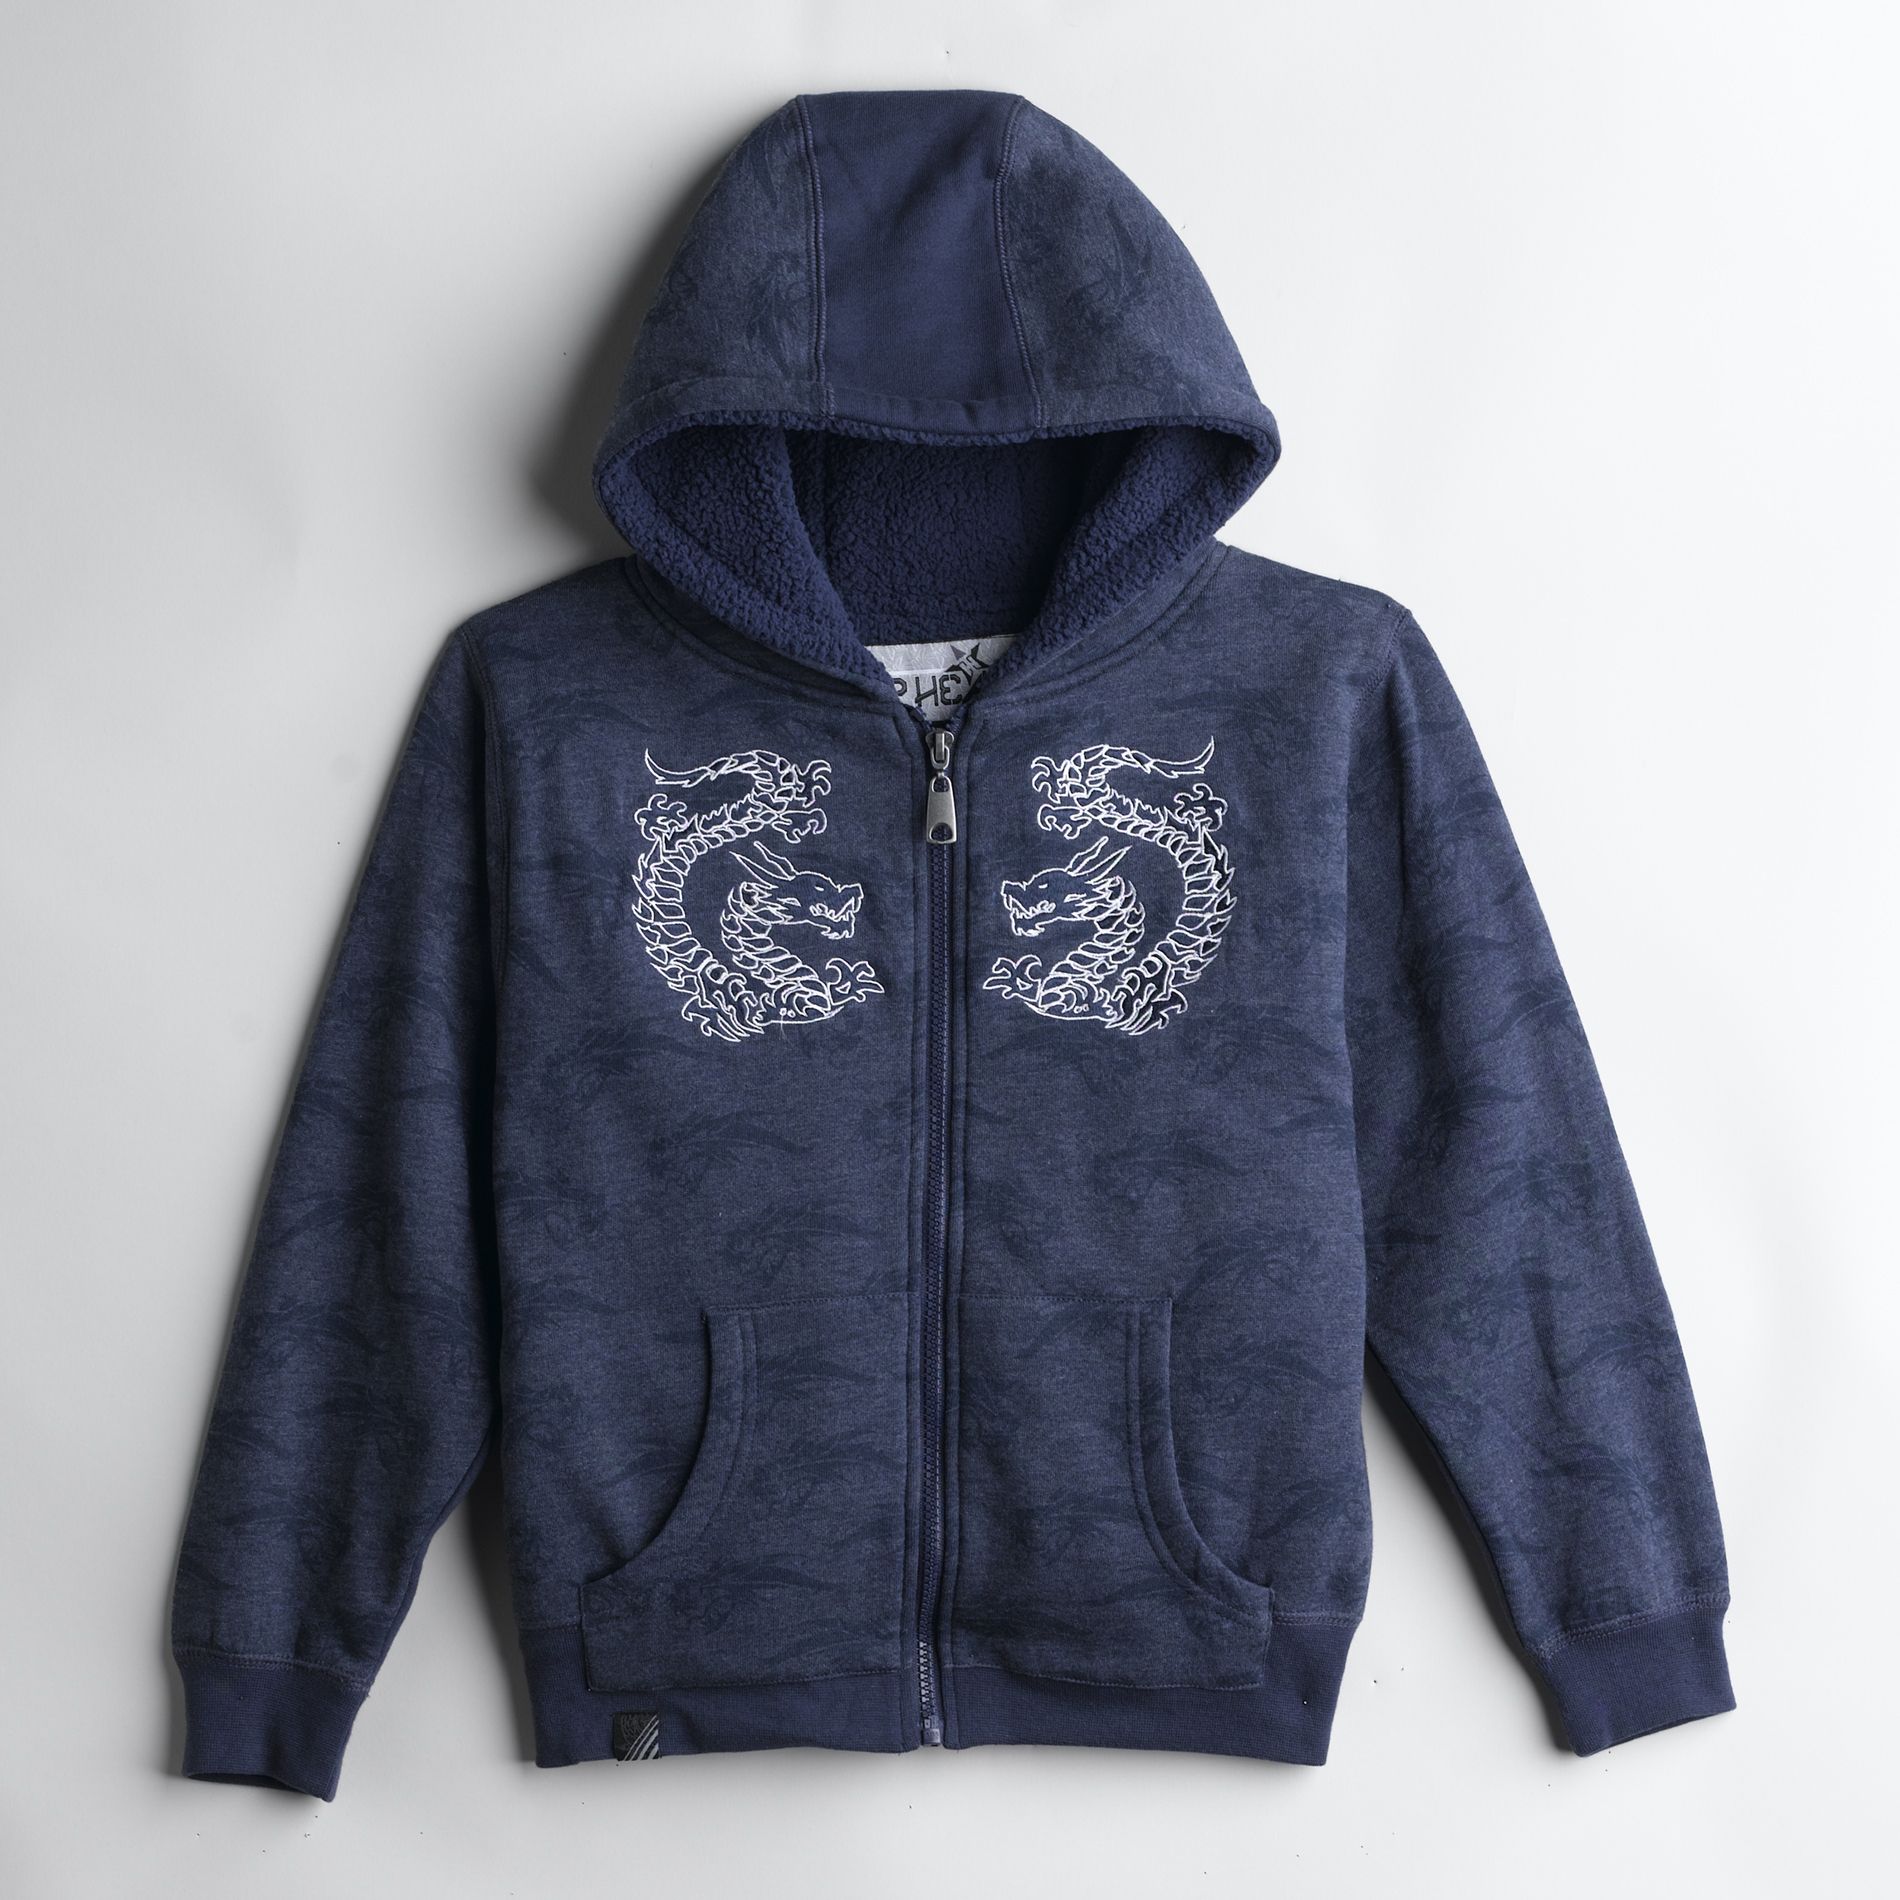 Top Heavy Boy's 4-7 Fleece Lined Hoodie With Dragon Embroidery